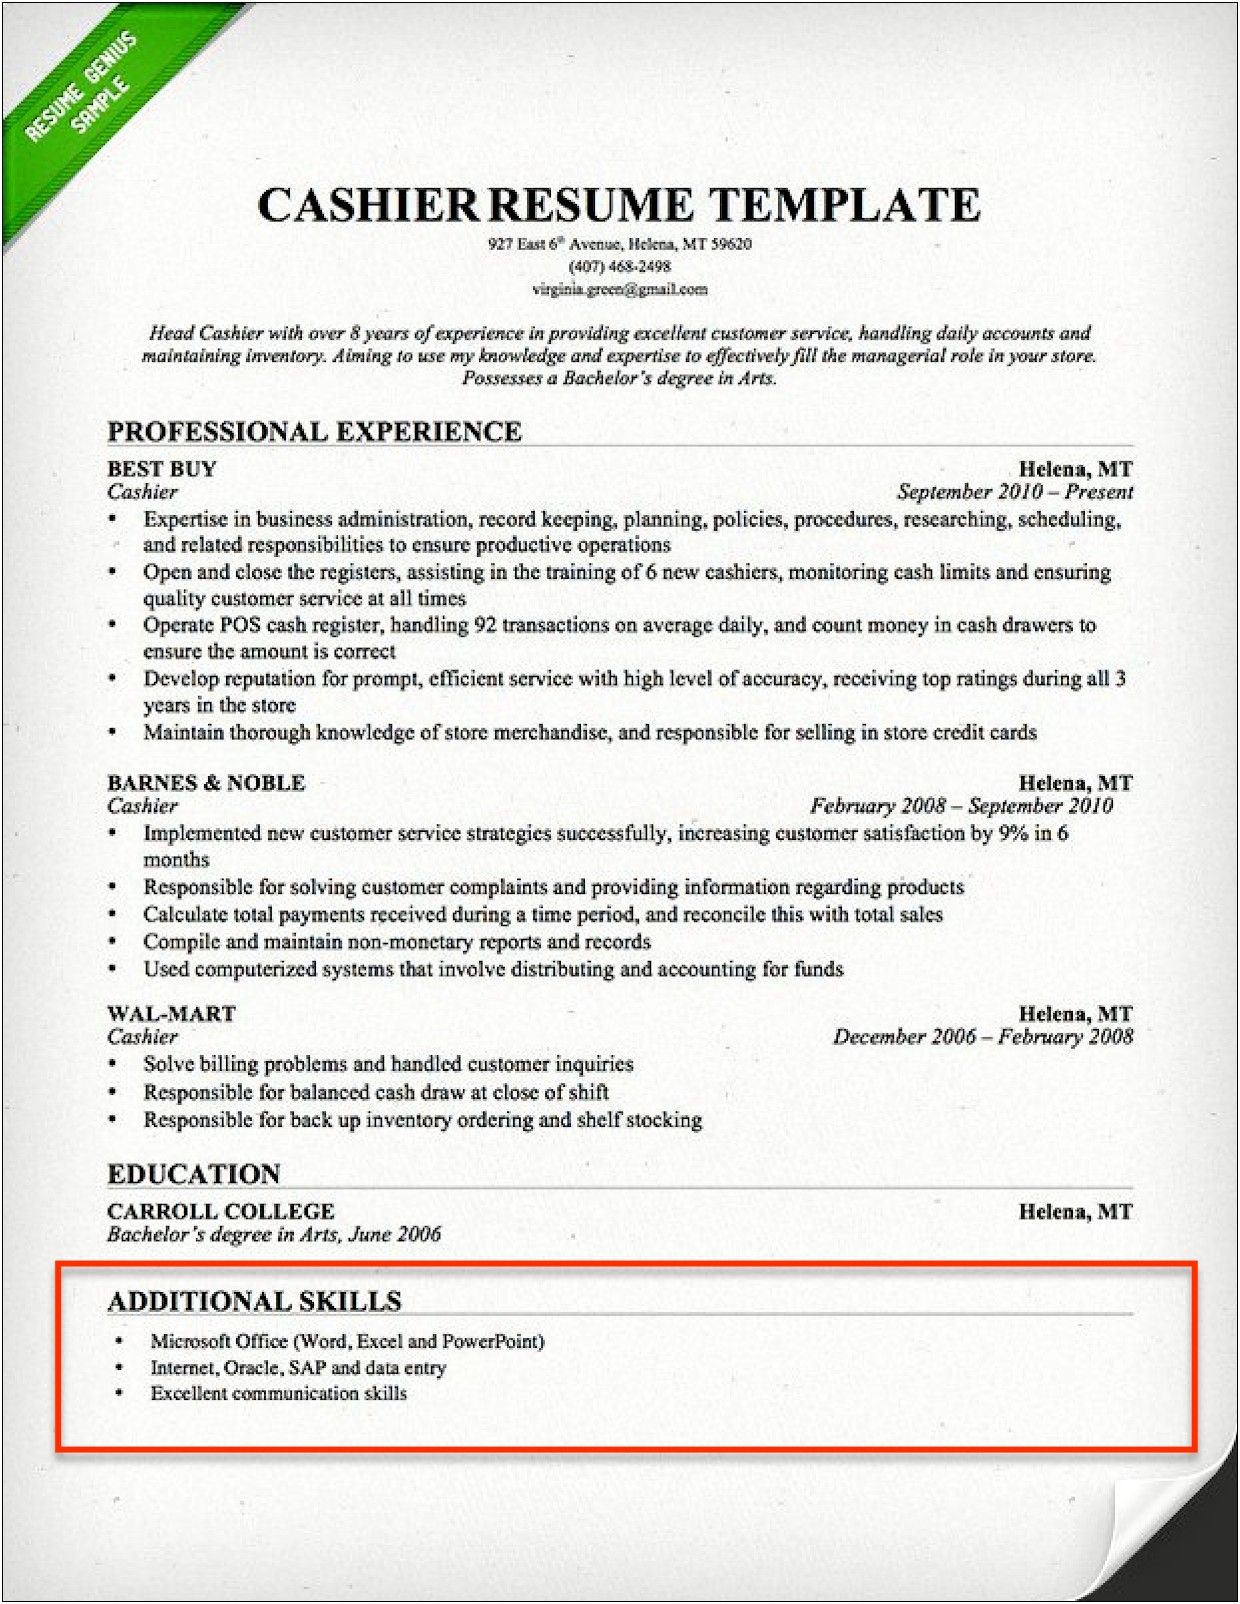 Barnes And Noble Resume Example